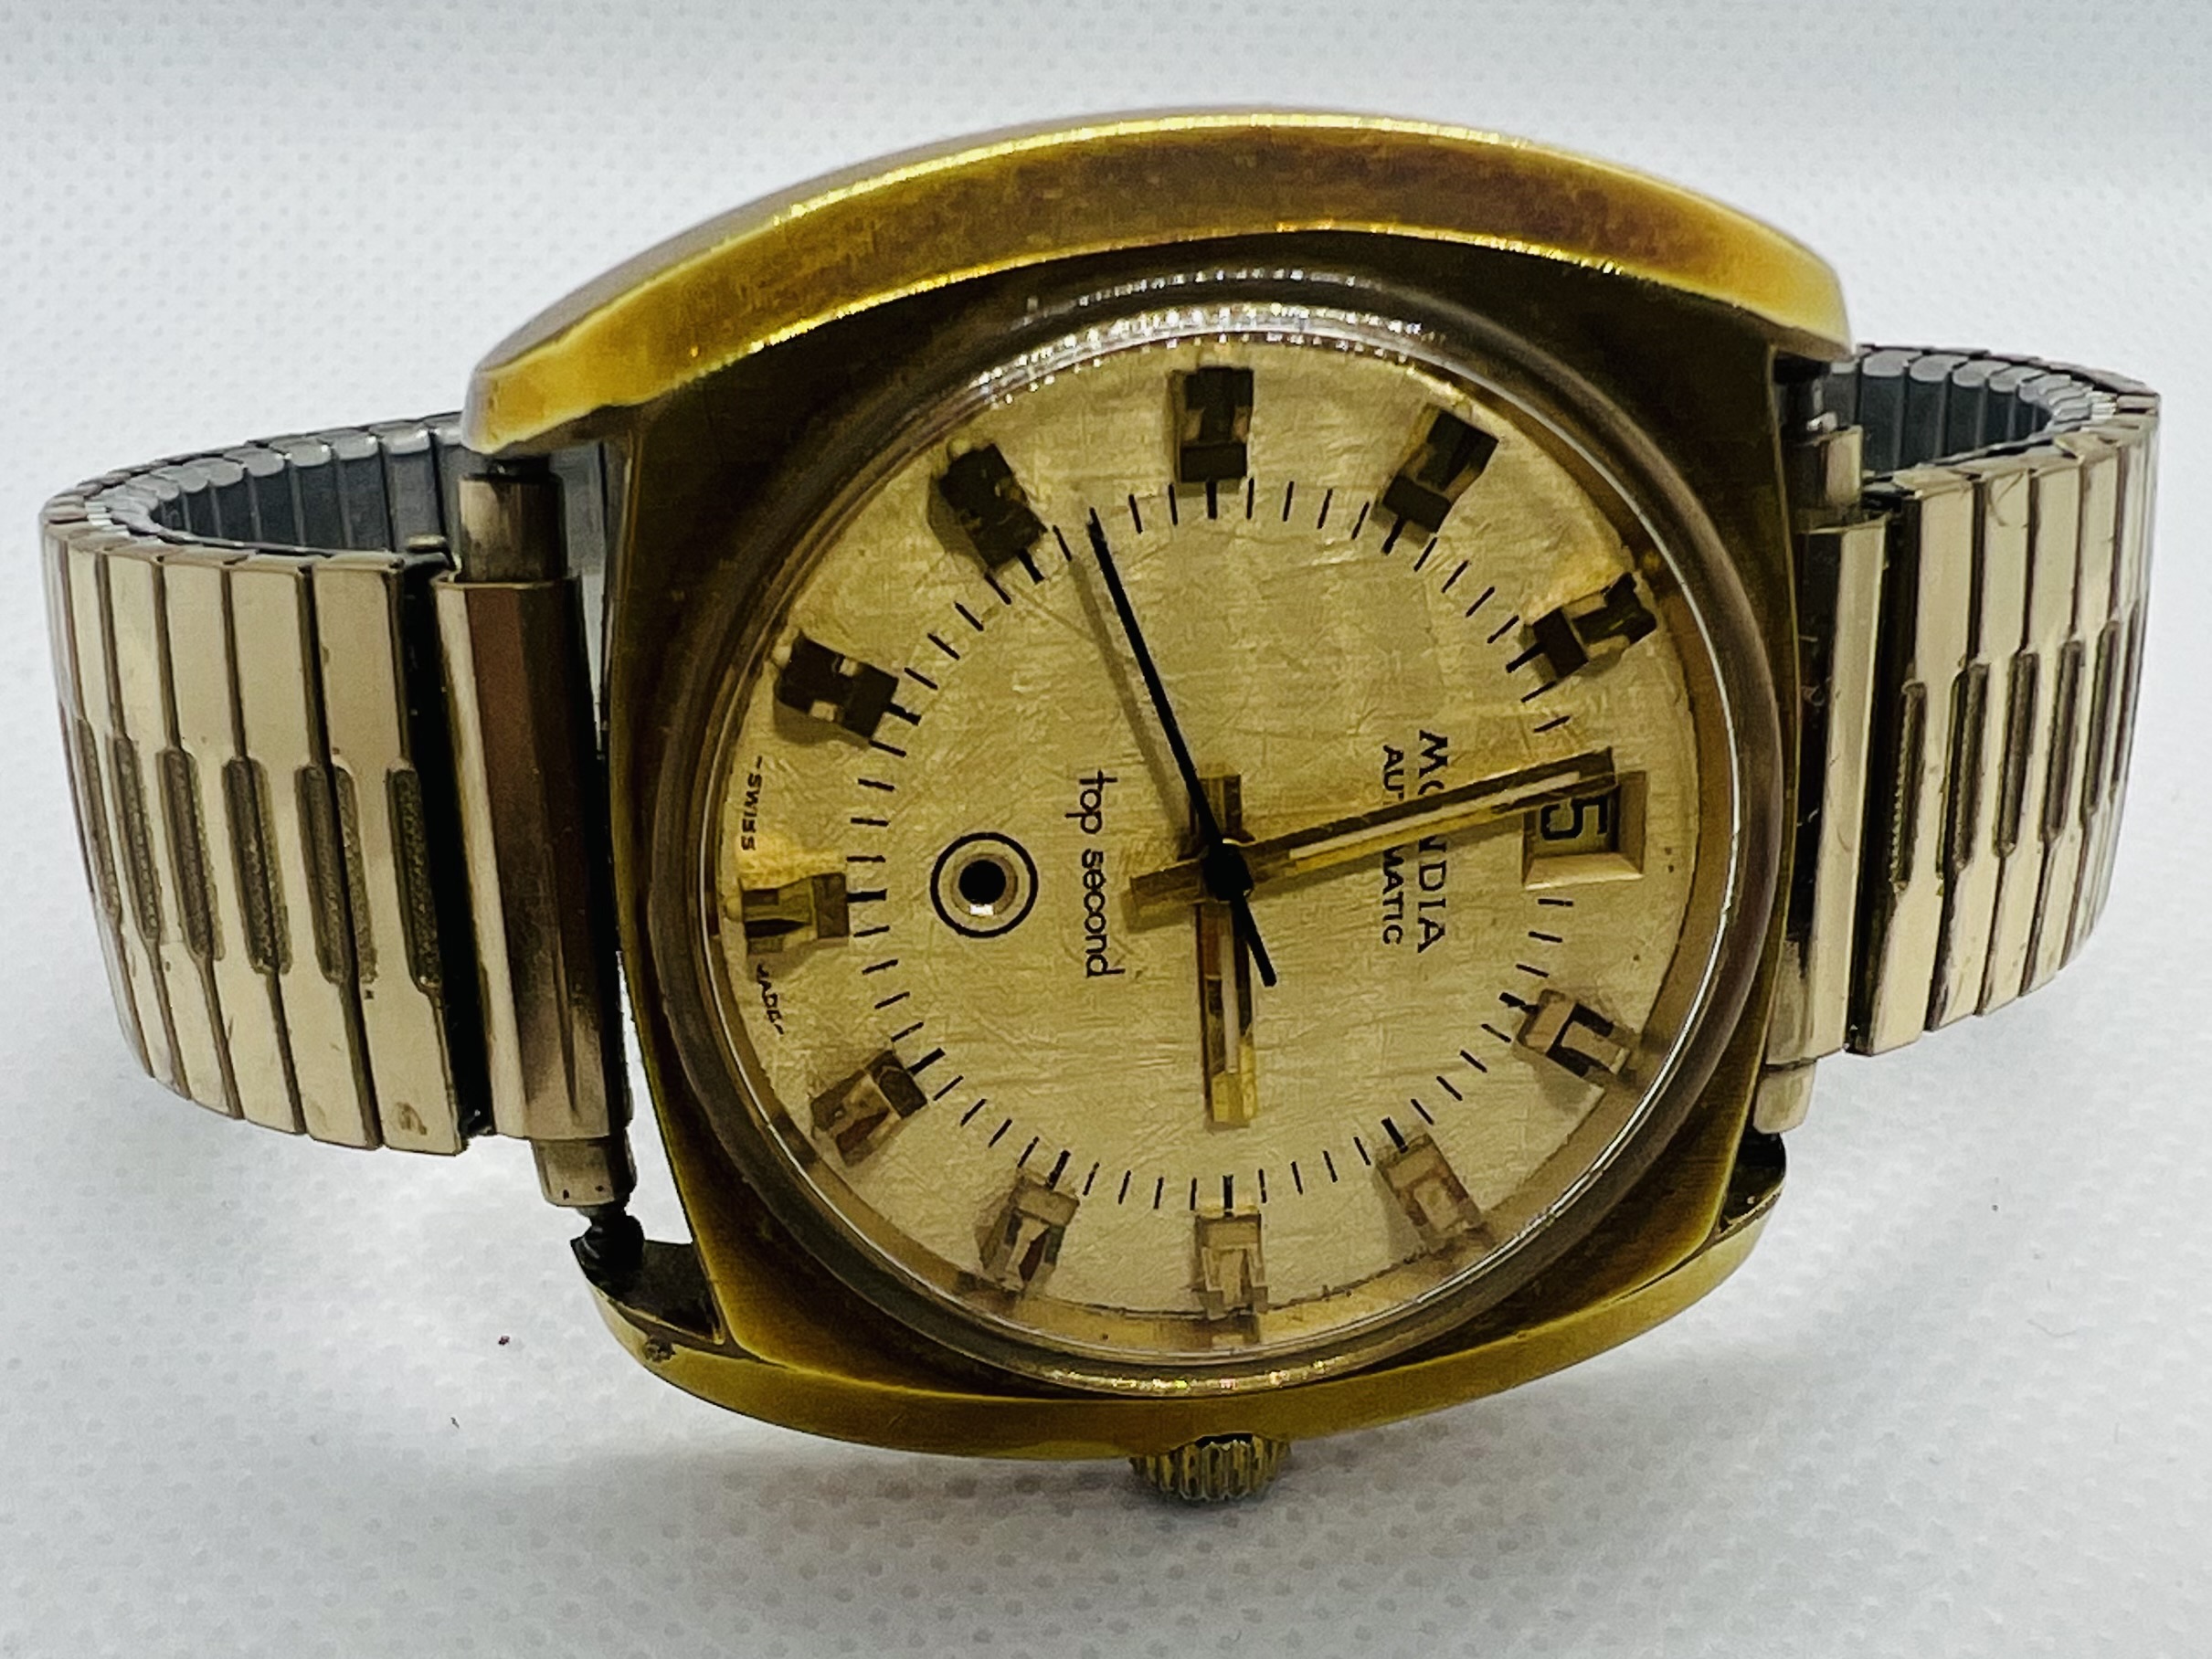 A Mondia "Top Second" Automatic gentleman's wrist watch. Untested but appears to run when activated